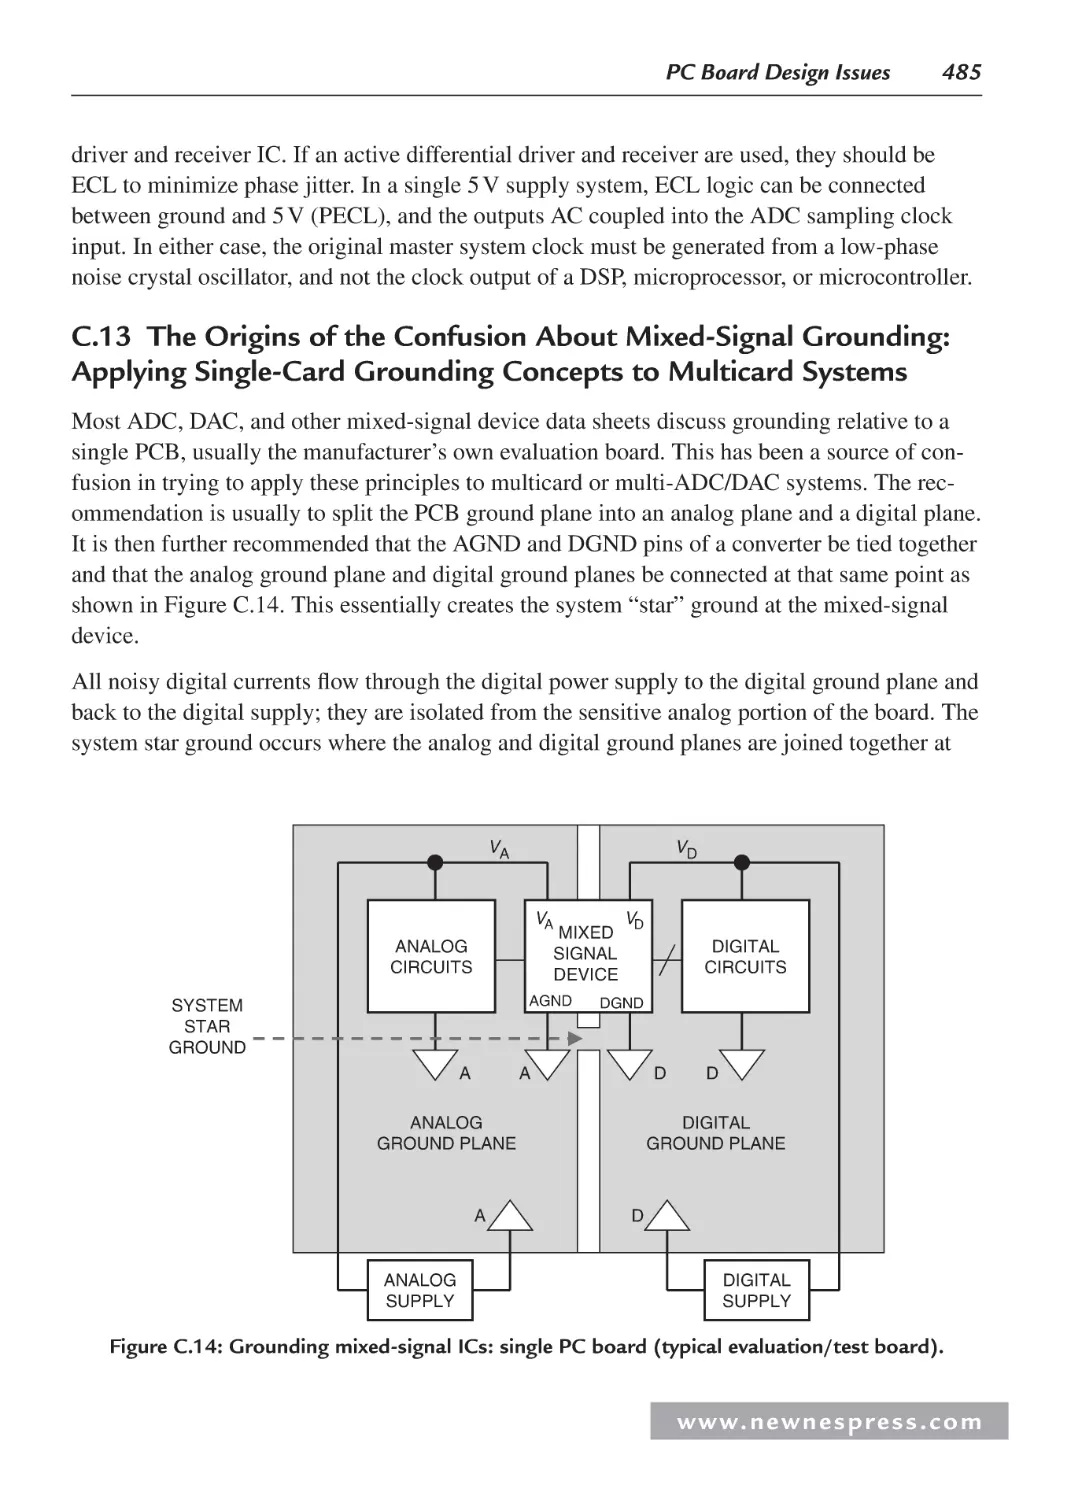 C.13 The Origins of the Confusion About Mixed-Signal Grounding